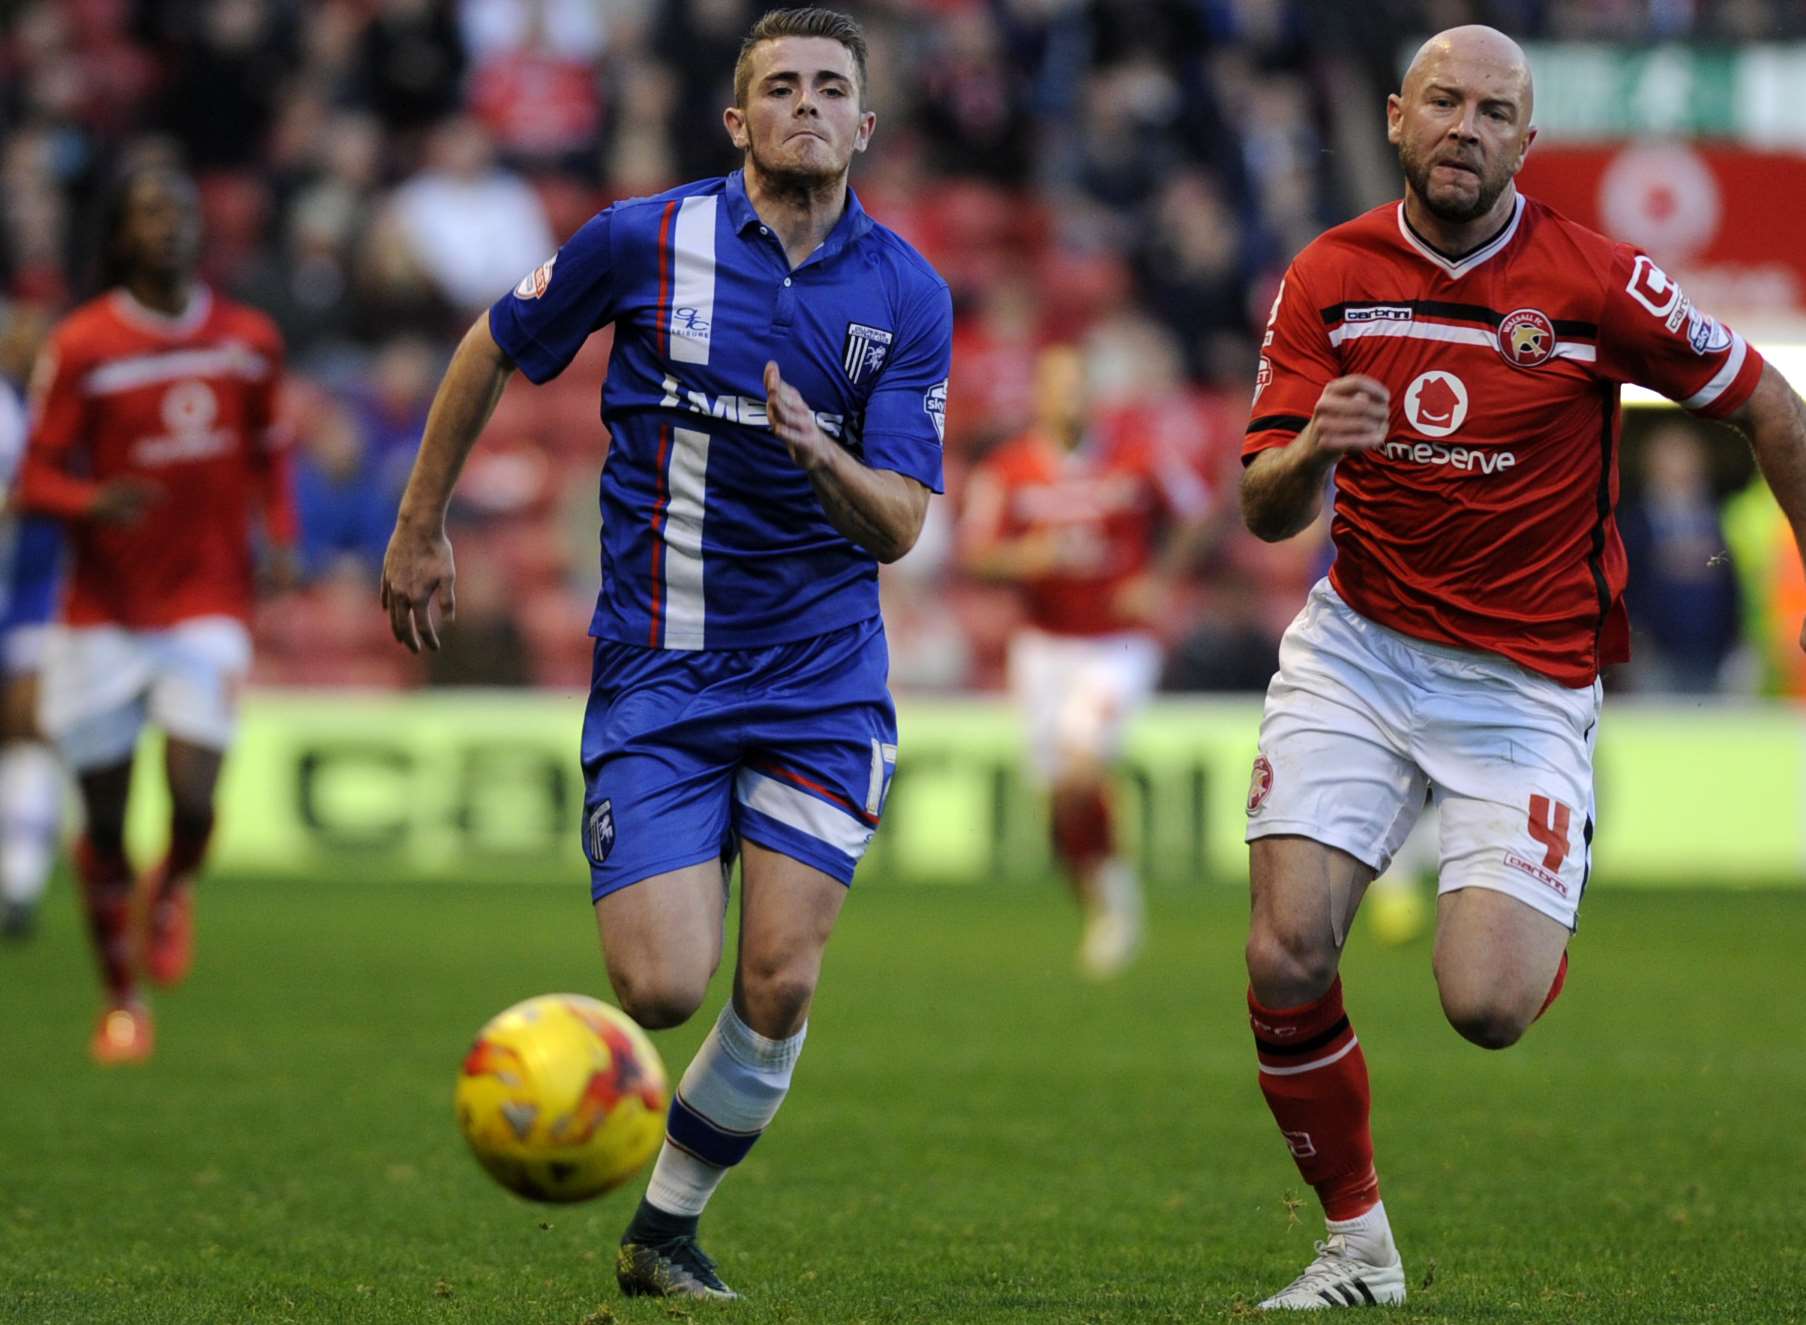 Rory Donnelly in action against Walsall on Saturday Picture: Barry Goodwin